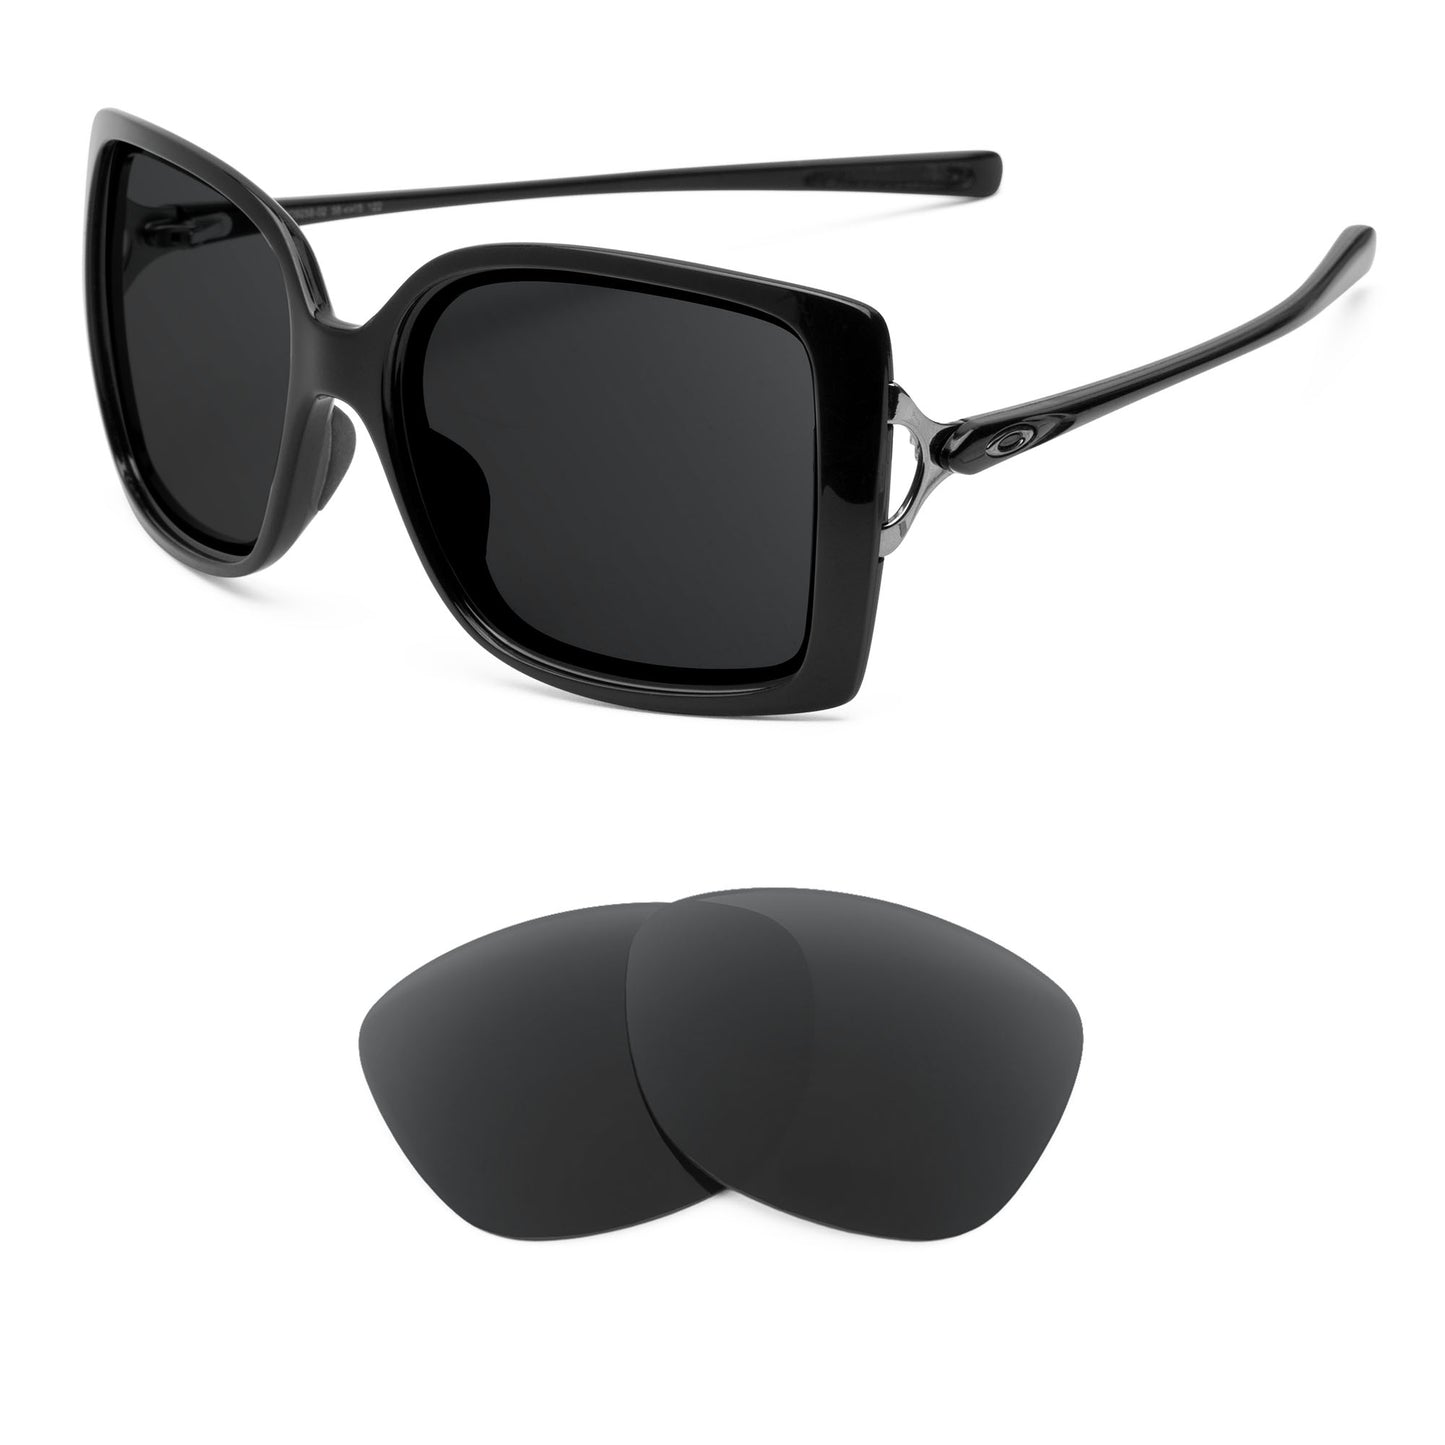 Oakley Splash sunglasses with replacement lenses